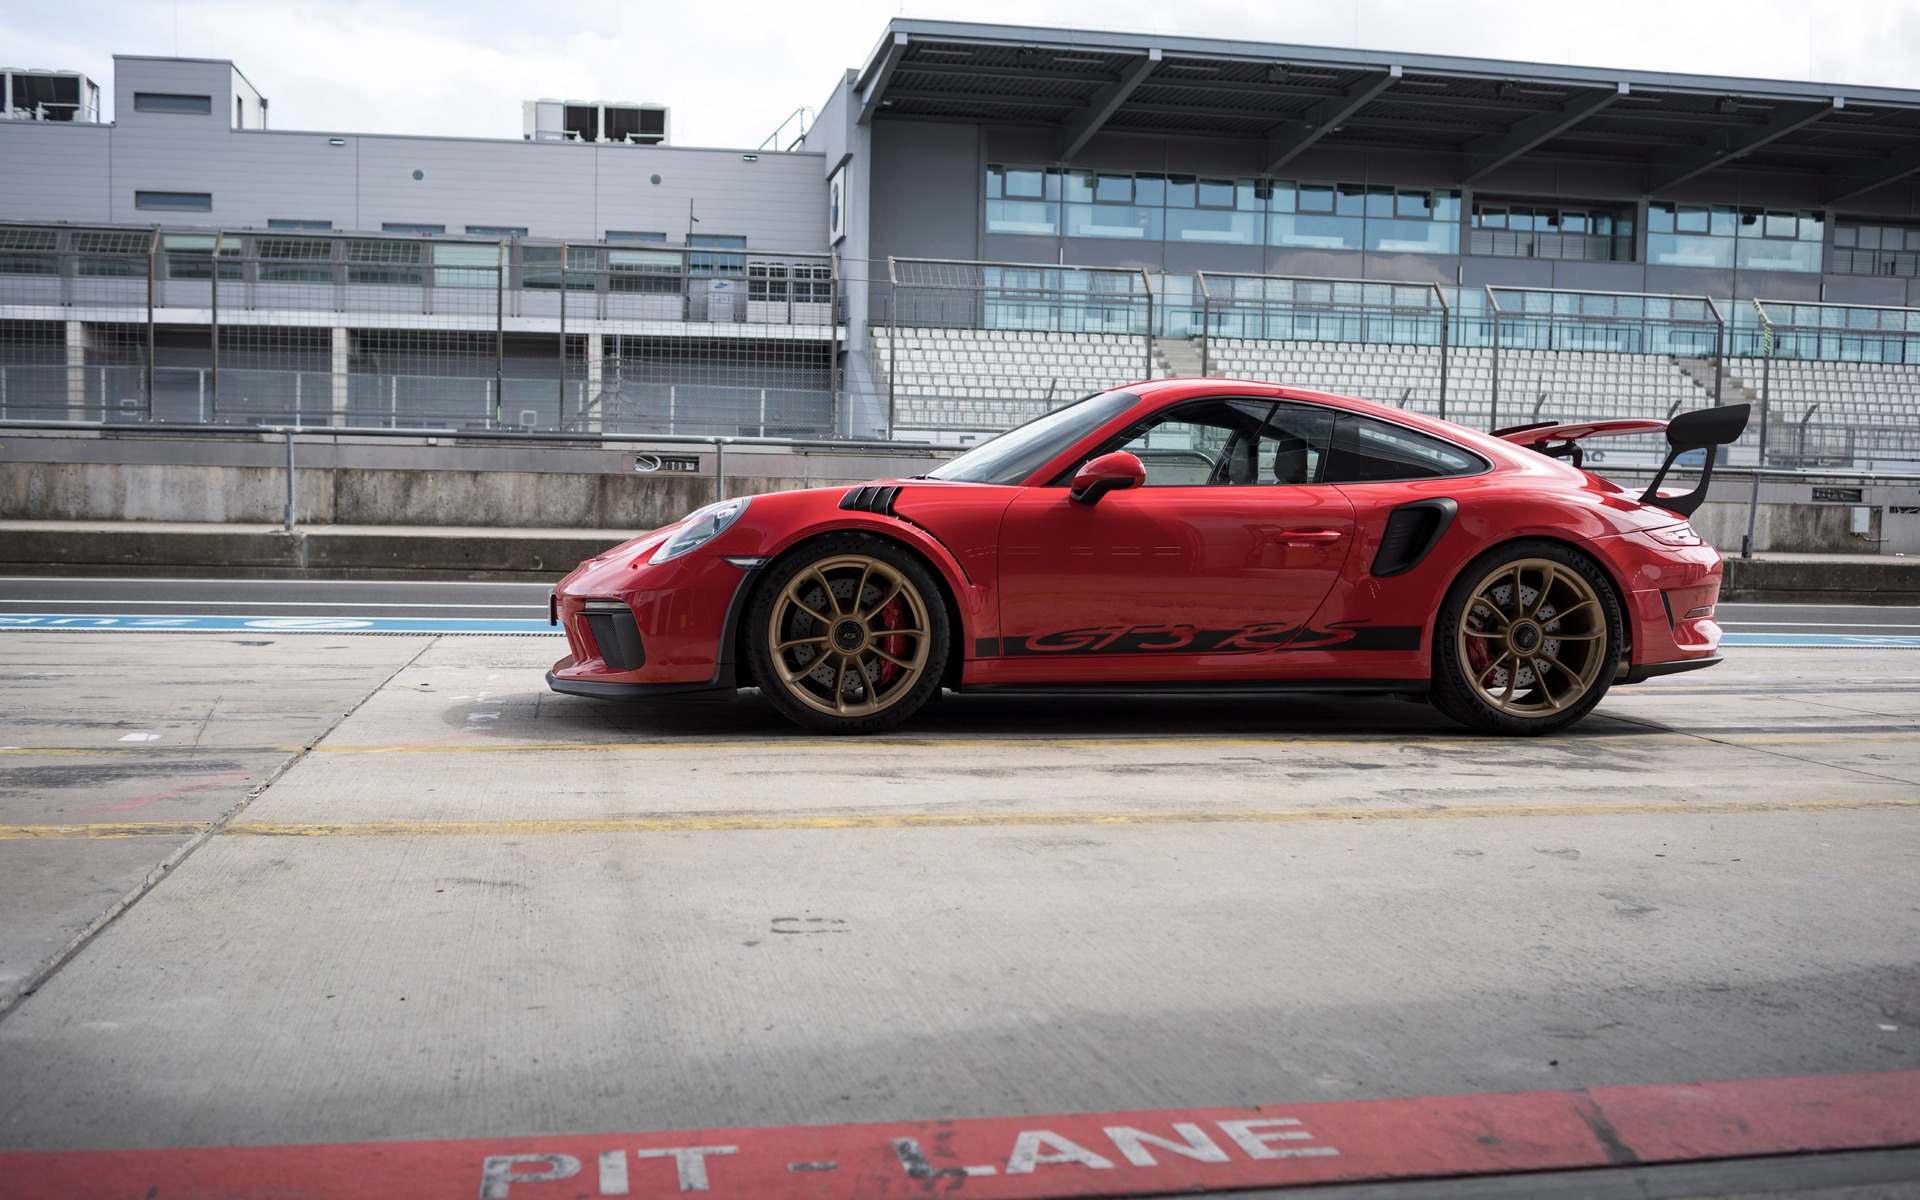 <p>2019 Porsche 911 GT3 RS - Shown here in Guards Red.</p>